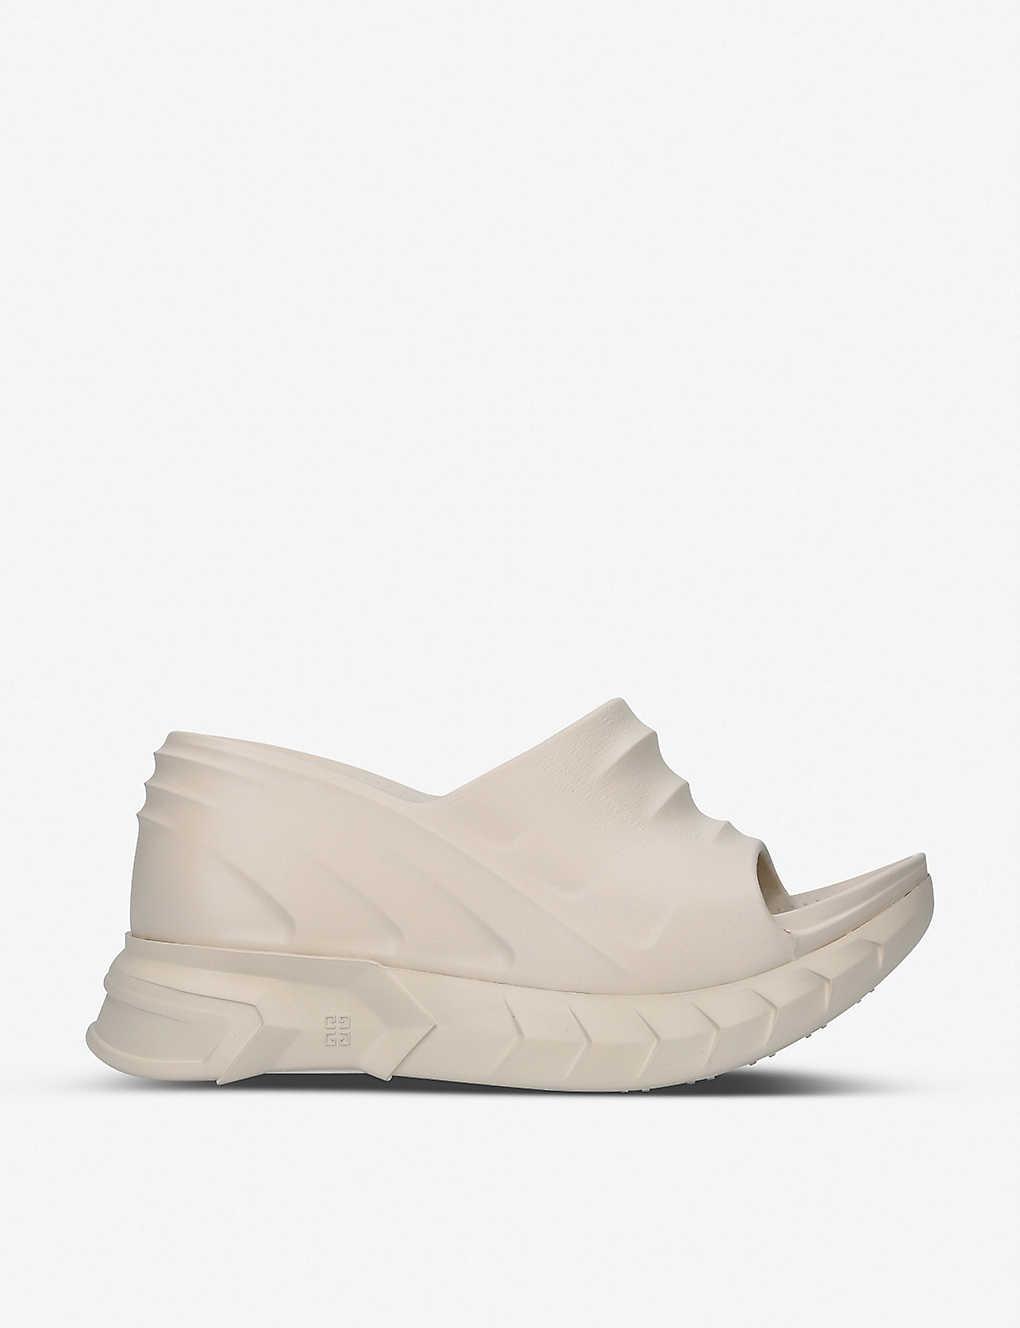 Givenchy Marshmallow Rubber Wedge Sandals | Lyst Australia